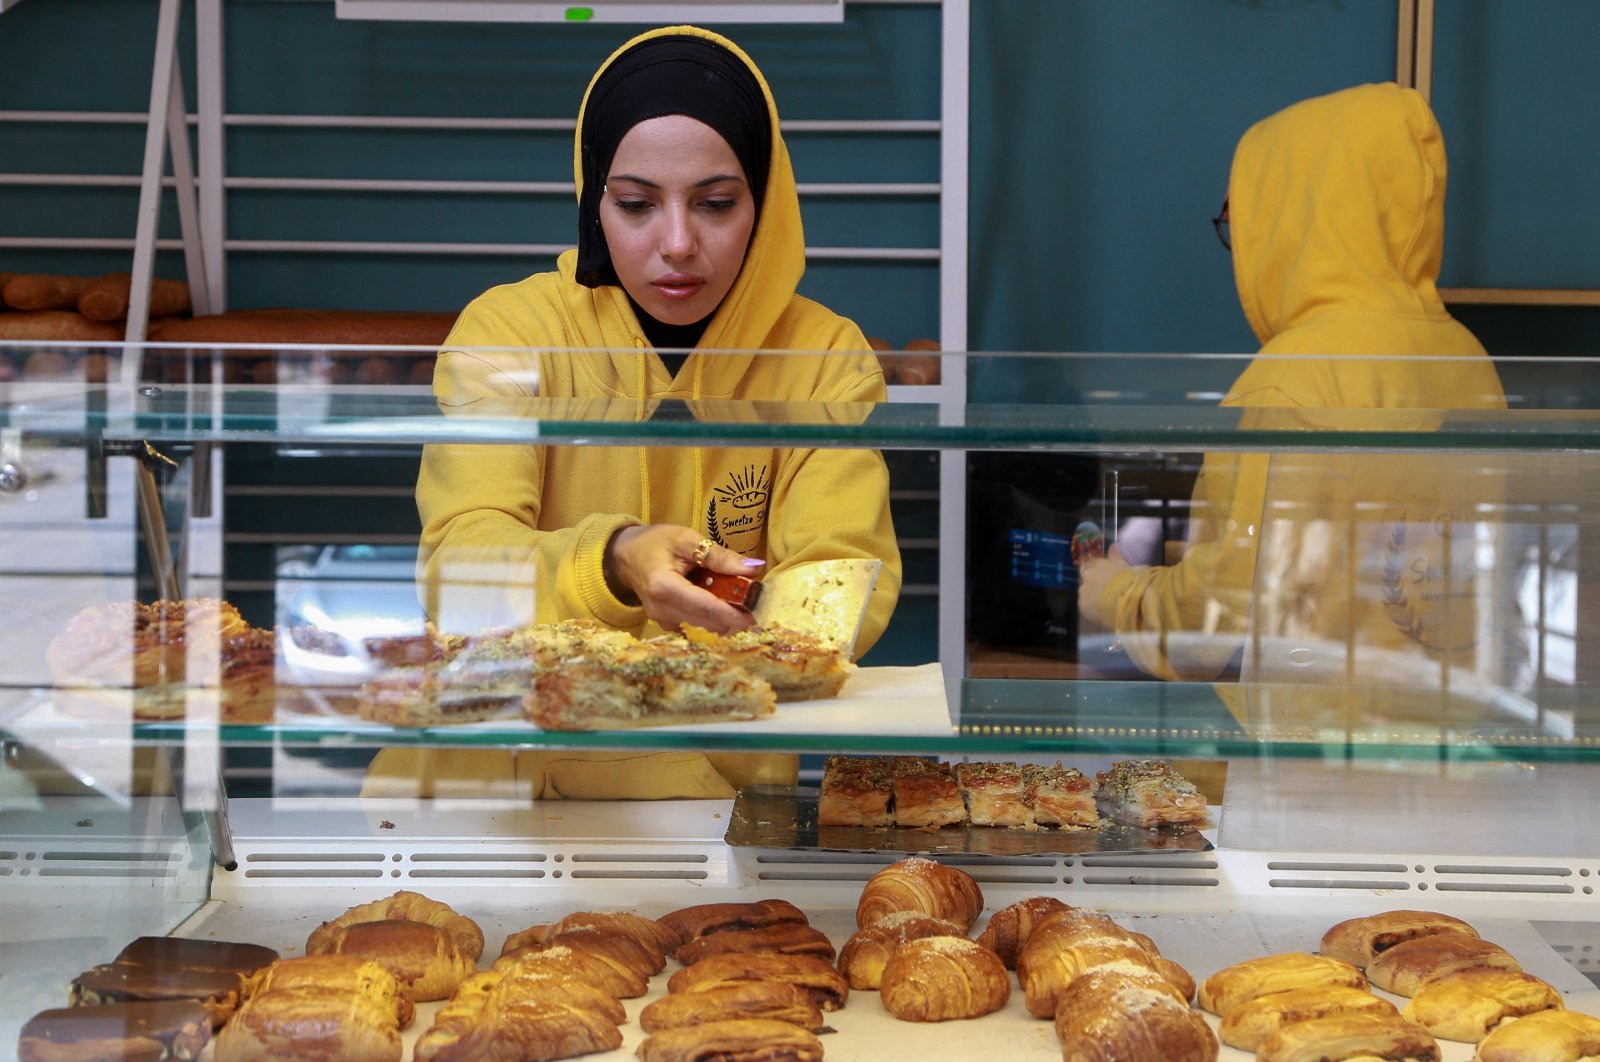 A staff member arranges baked goods at a bakery that is unsubsidized by the Tunisian state, in the capital Tunis, on March 11, 2022. (AFP Photo)